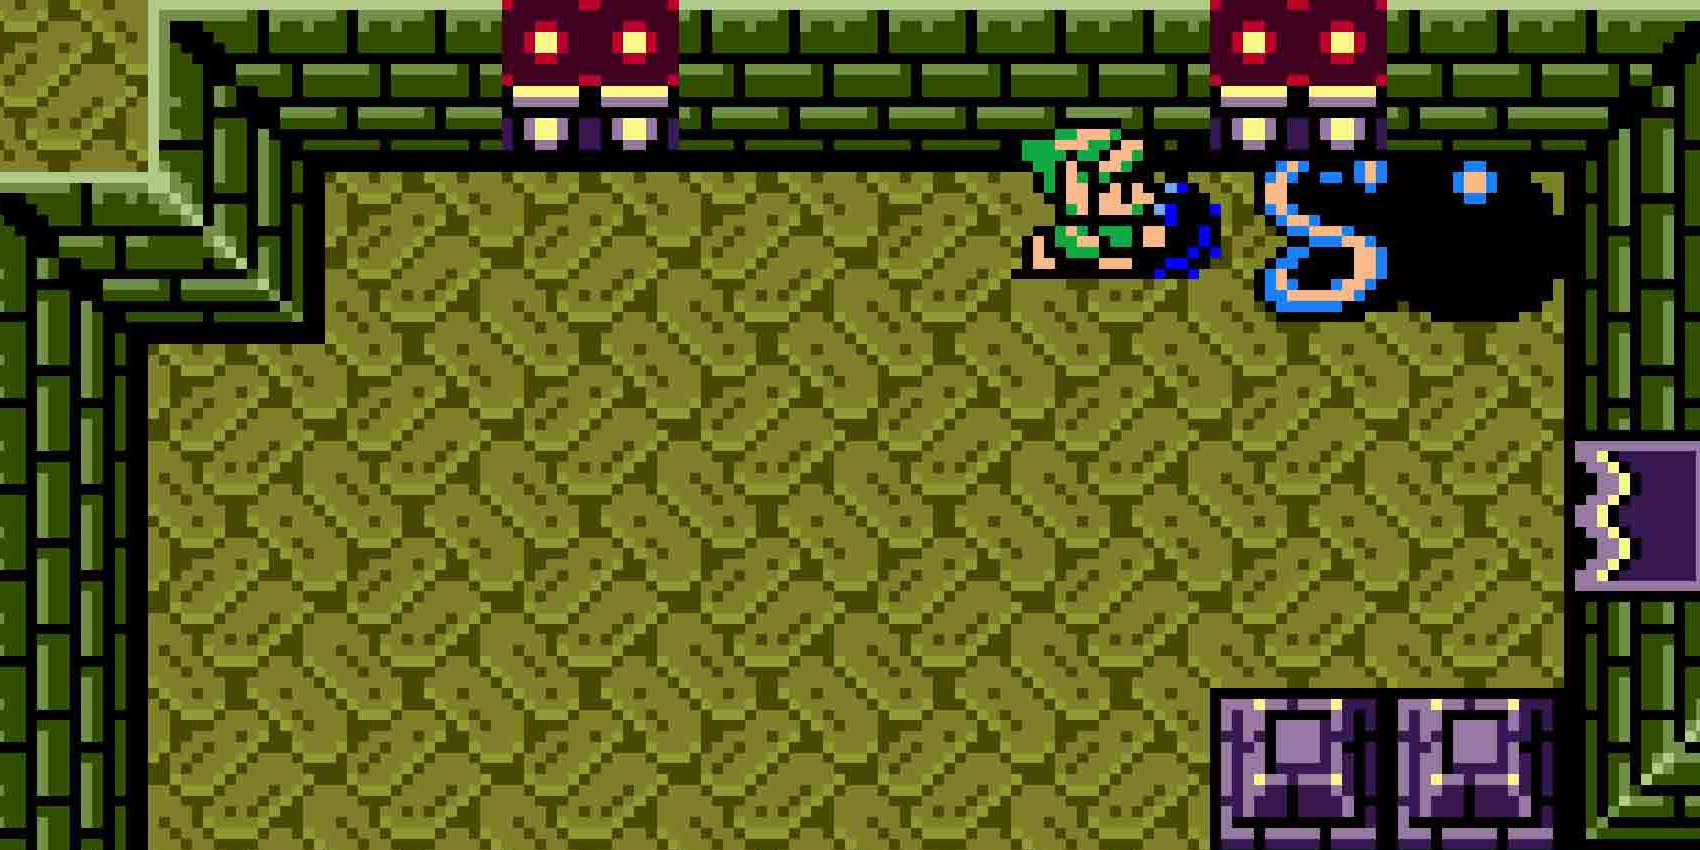 Link placing a bomb in Link's Awakening DX.